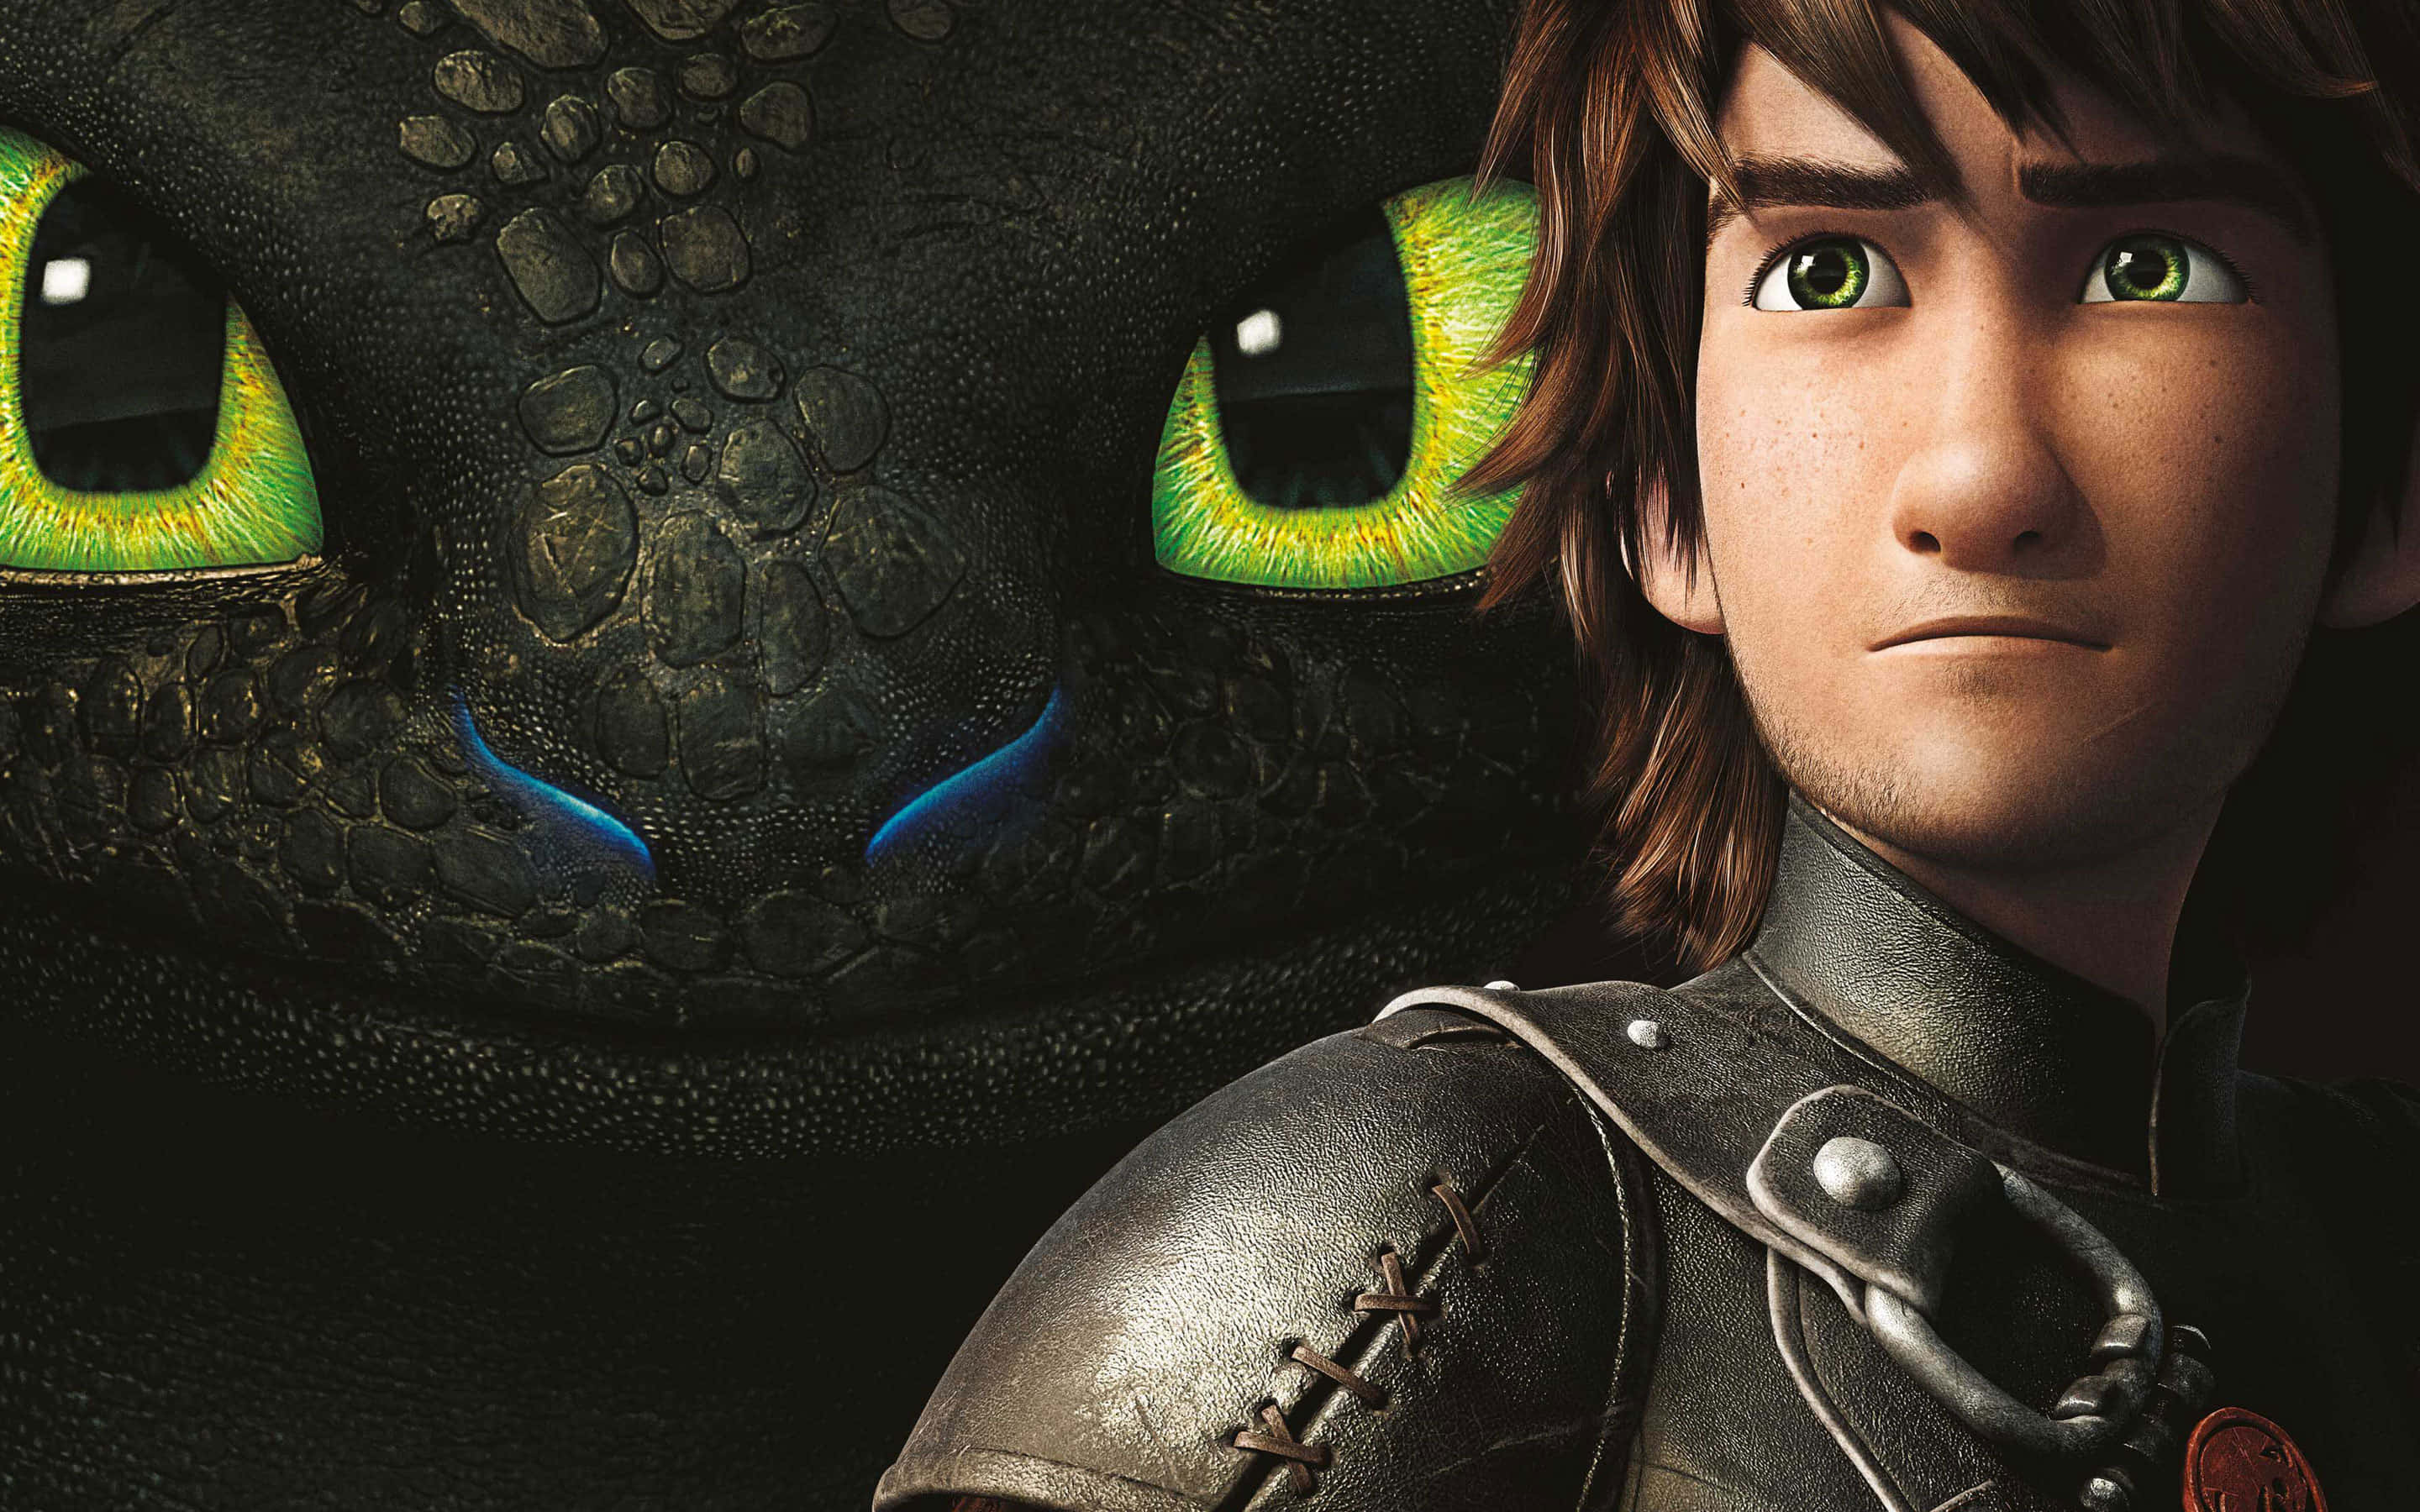 Experience the majesty of How To Train Your Dragon in glorious 4K resolution! Wallpaper